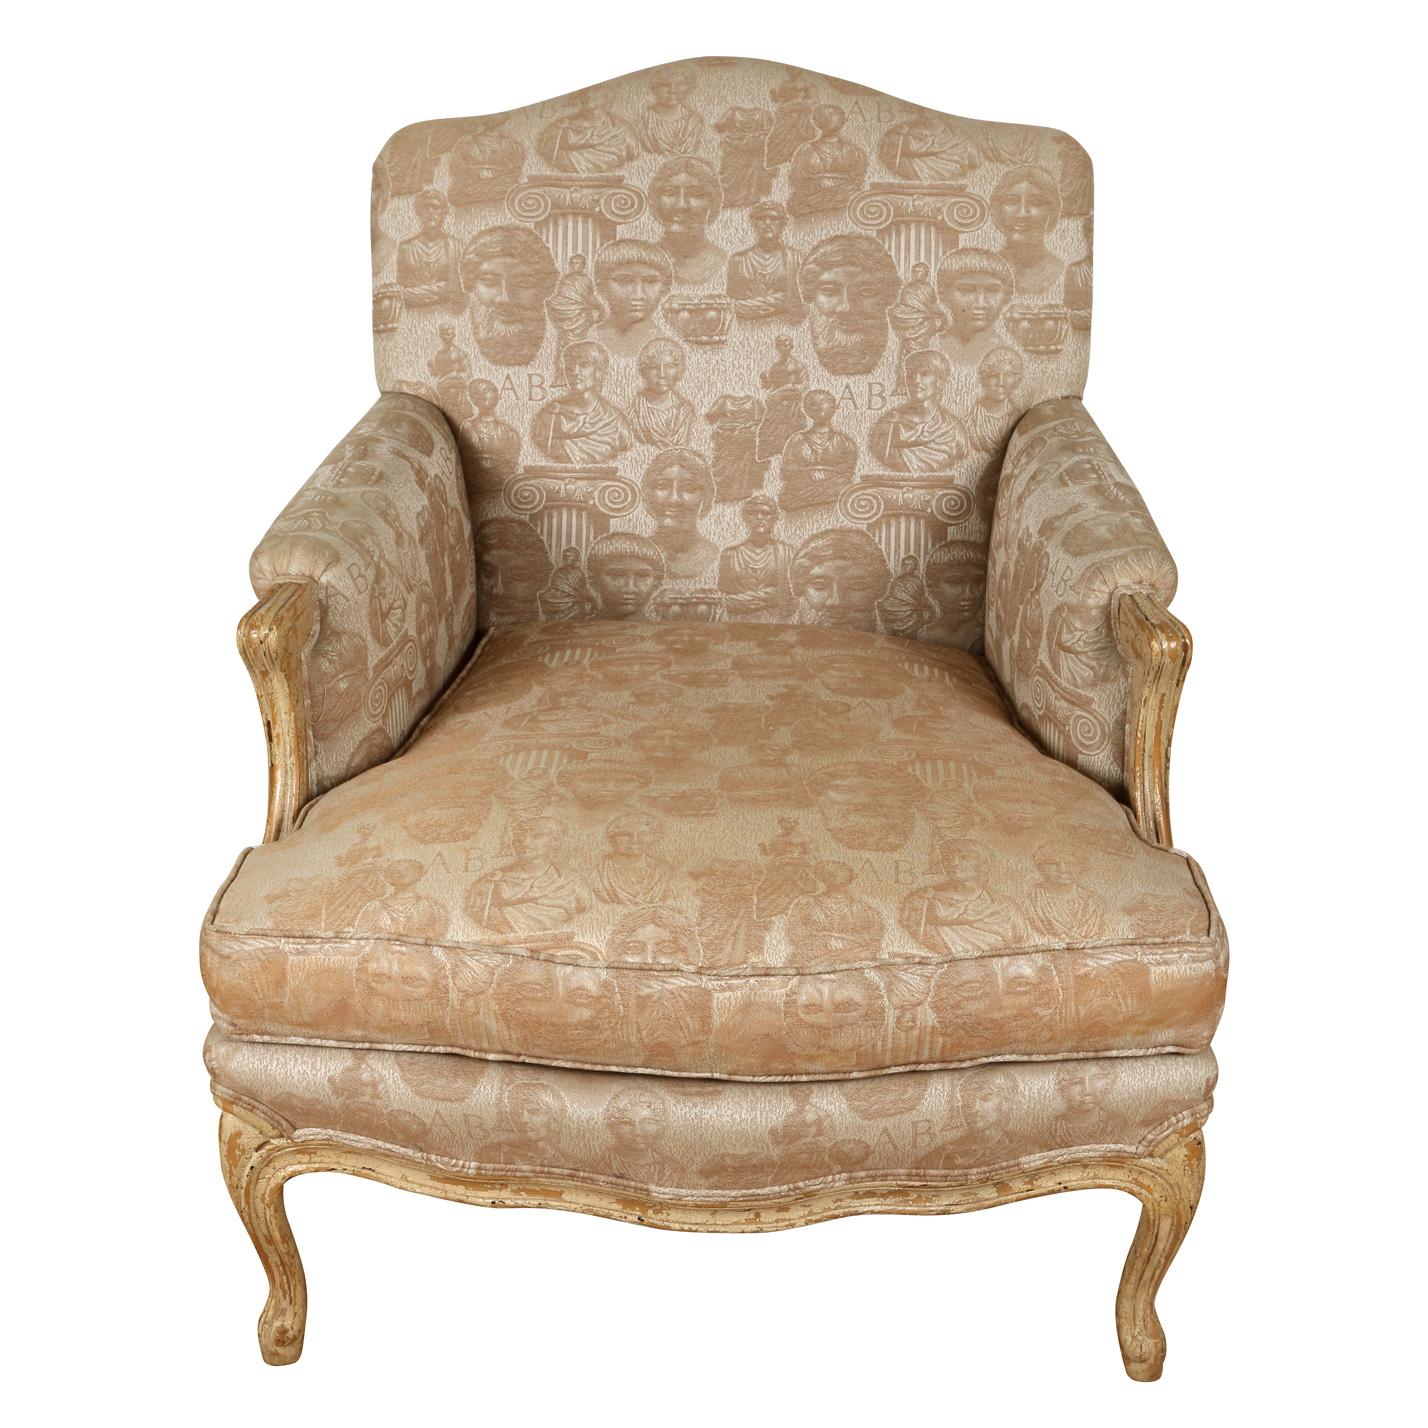 Upholstered damask arm chair and ottoman with visage motif with French style frame and legs. Chair measures 32